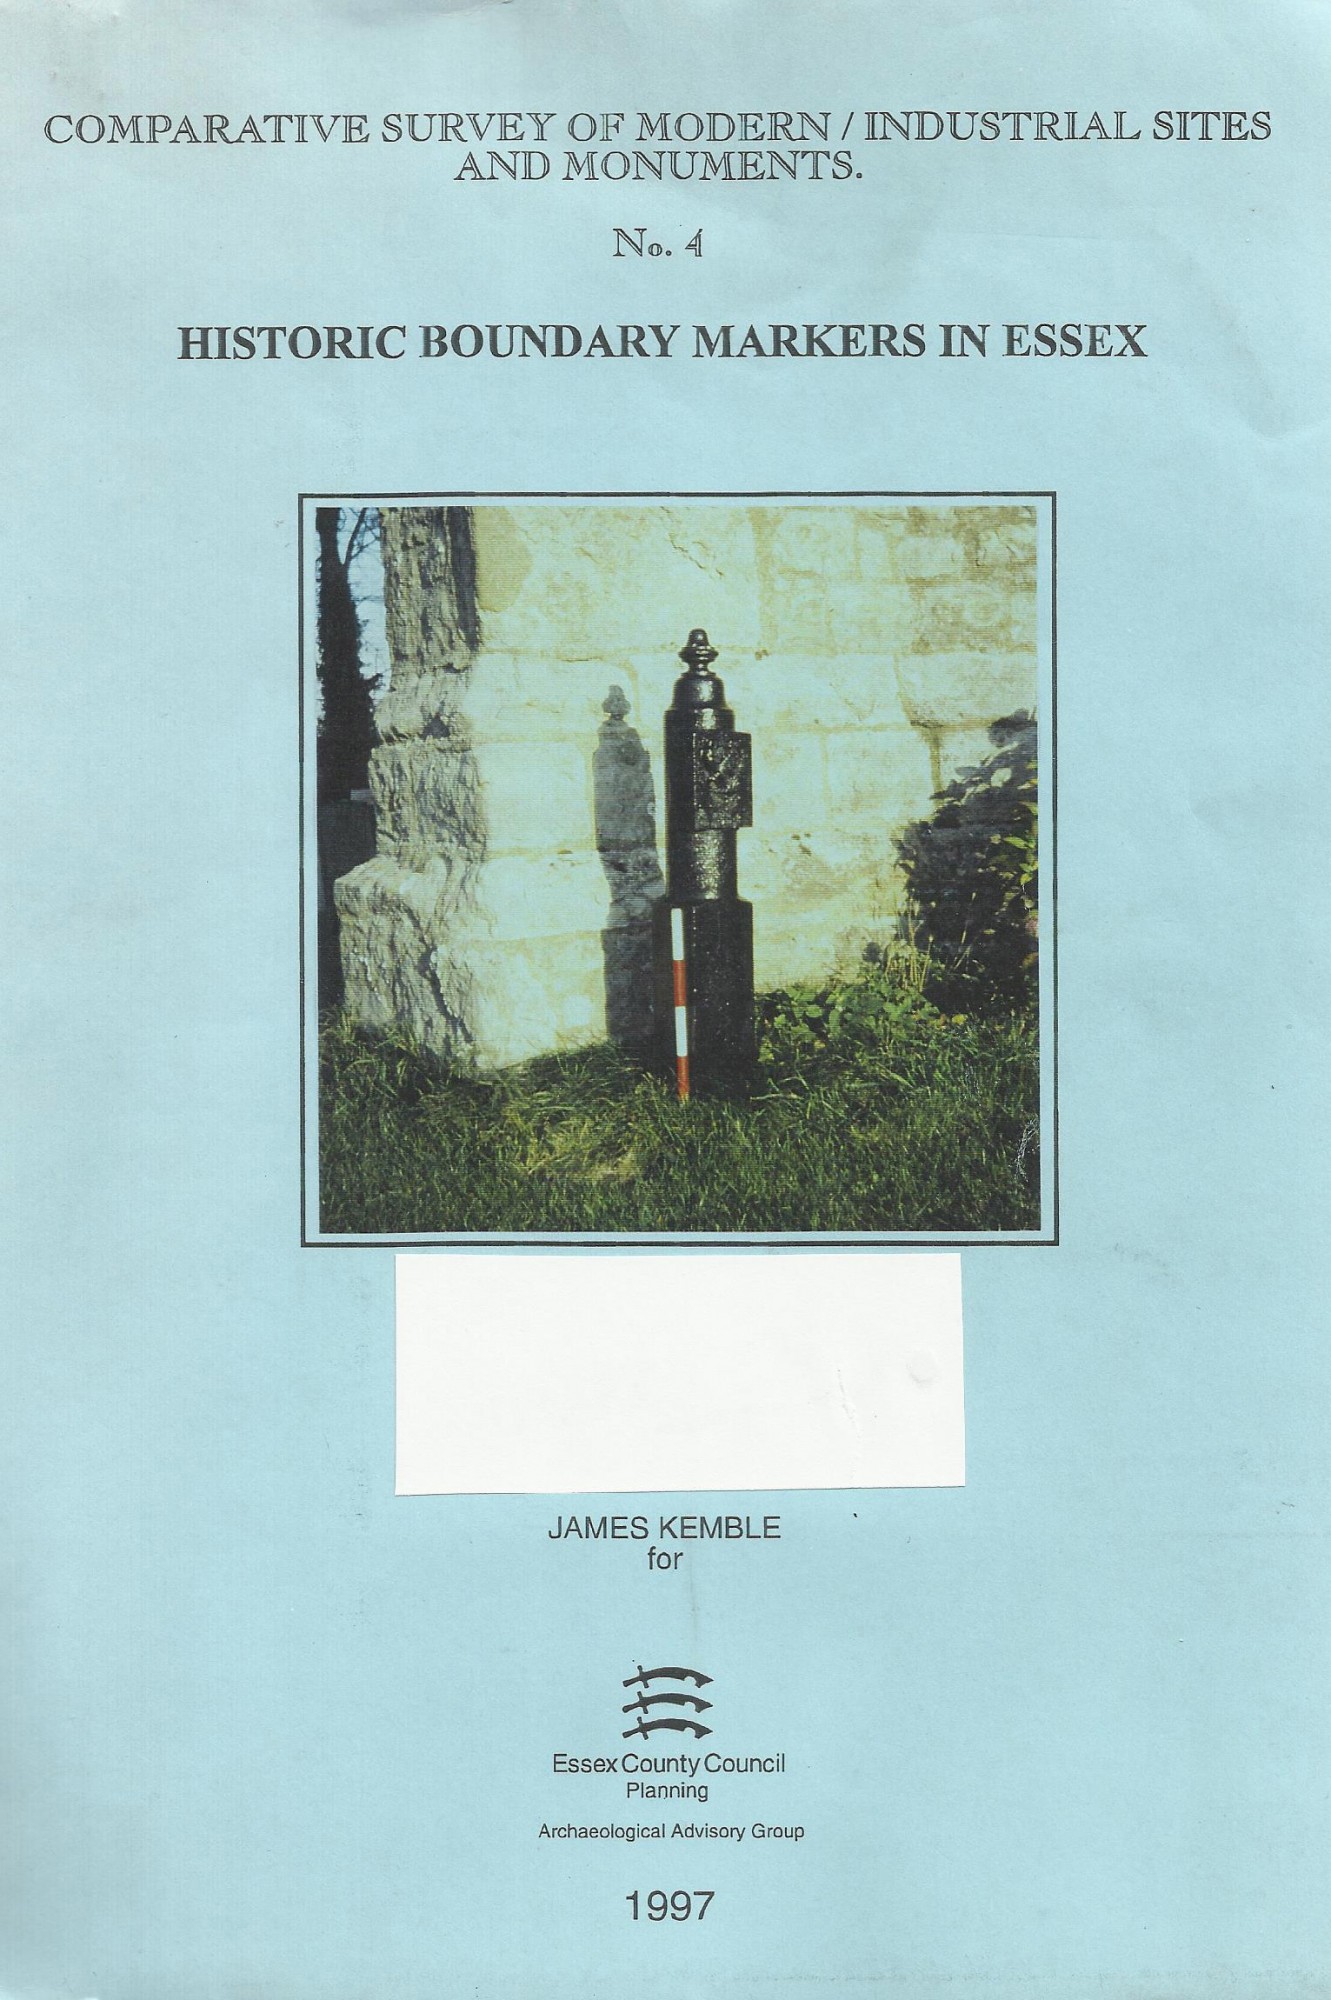 Historic Boundary Markers in Essex (1997) eiag illustration 1